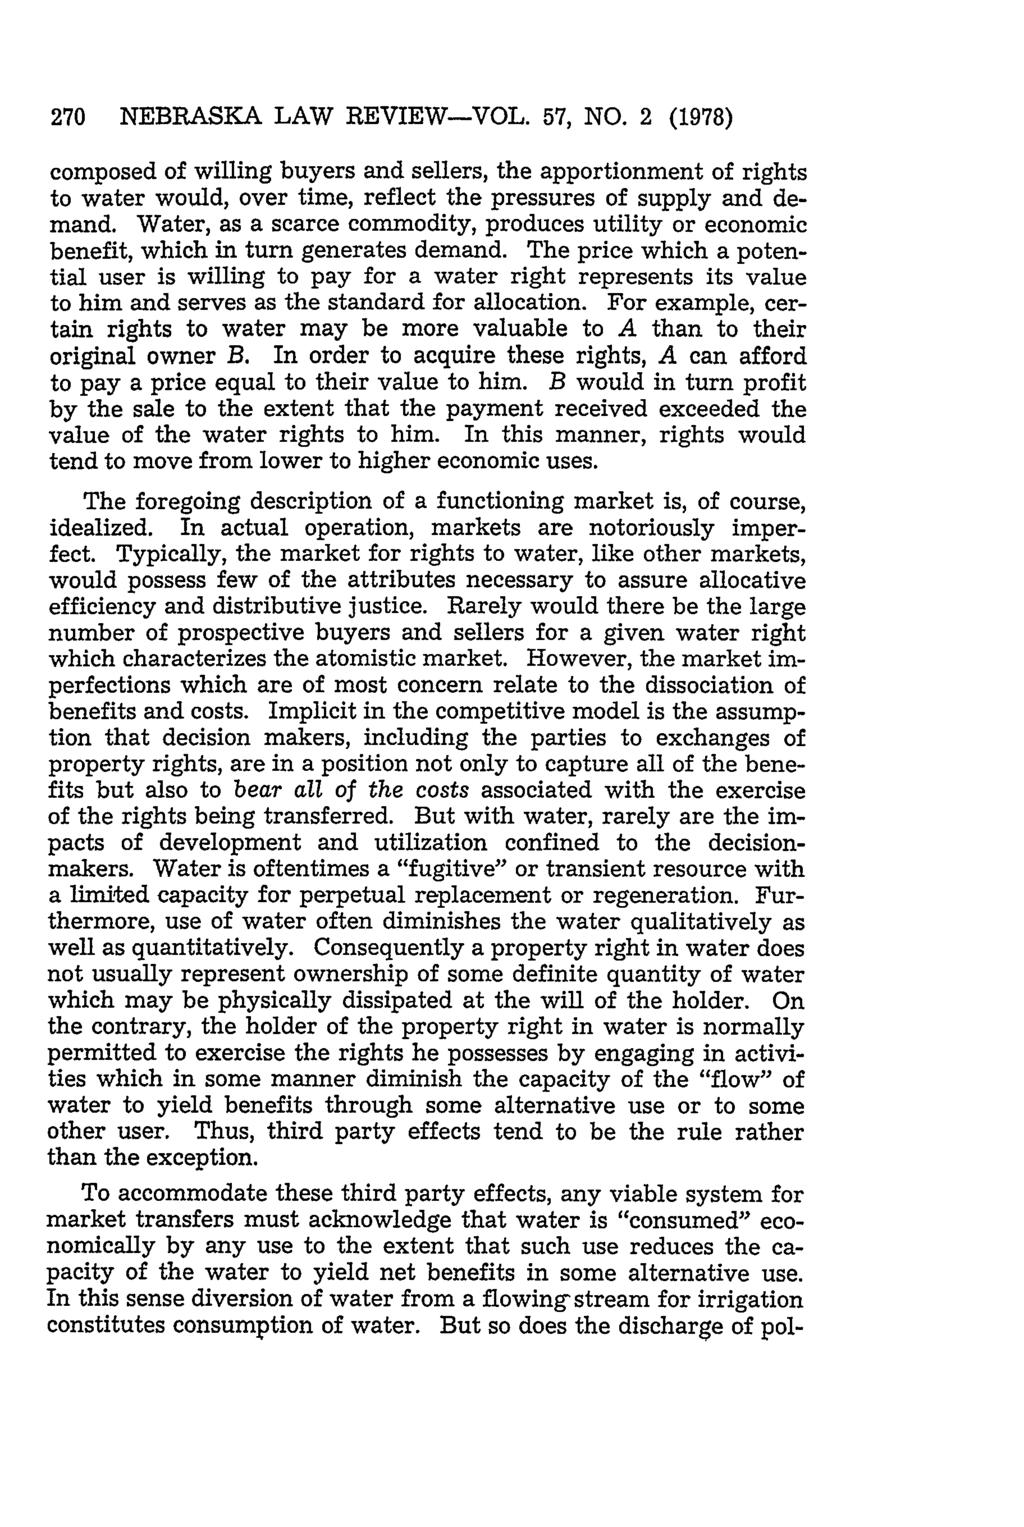 270 NEBRASKA LAW REVIEW-VOL. 57, NO. 2 (1978) composed of willing buyers and sellers, the apportionment of rights to water would, over time, reflect the pressures of supply and demand.